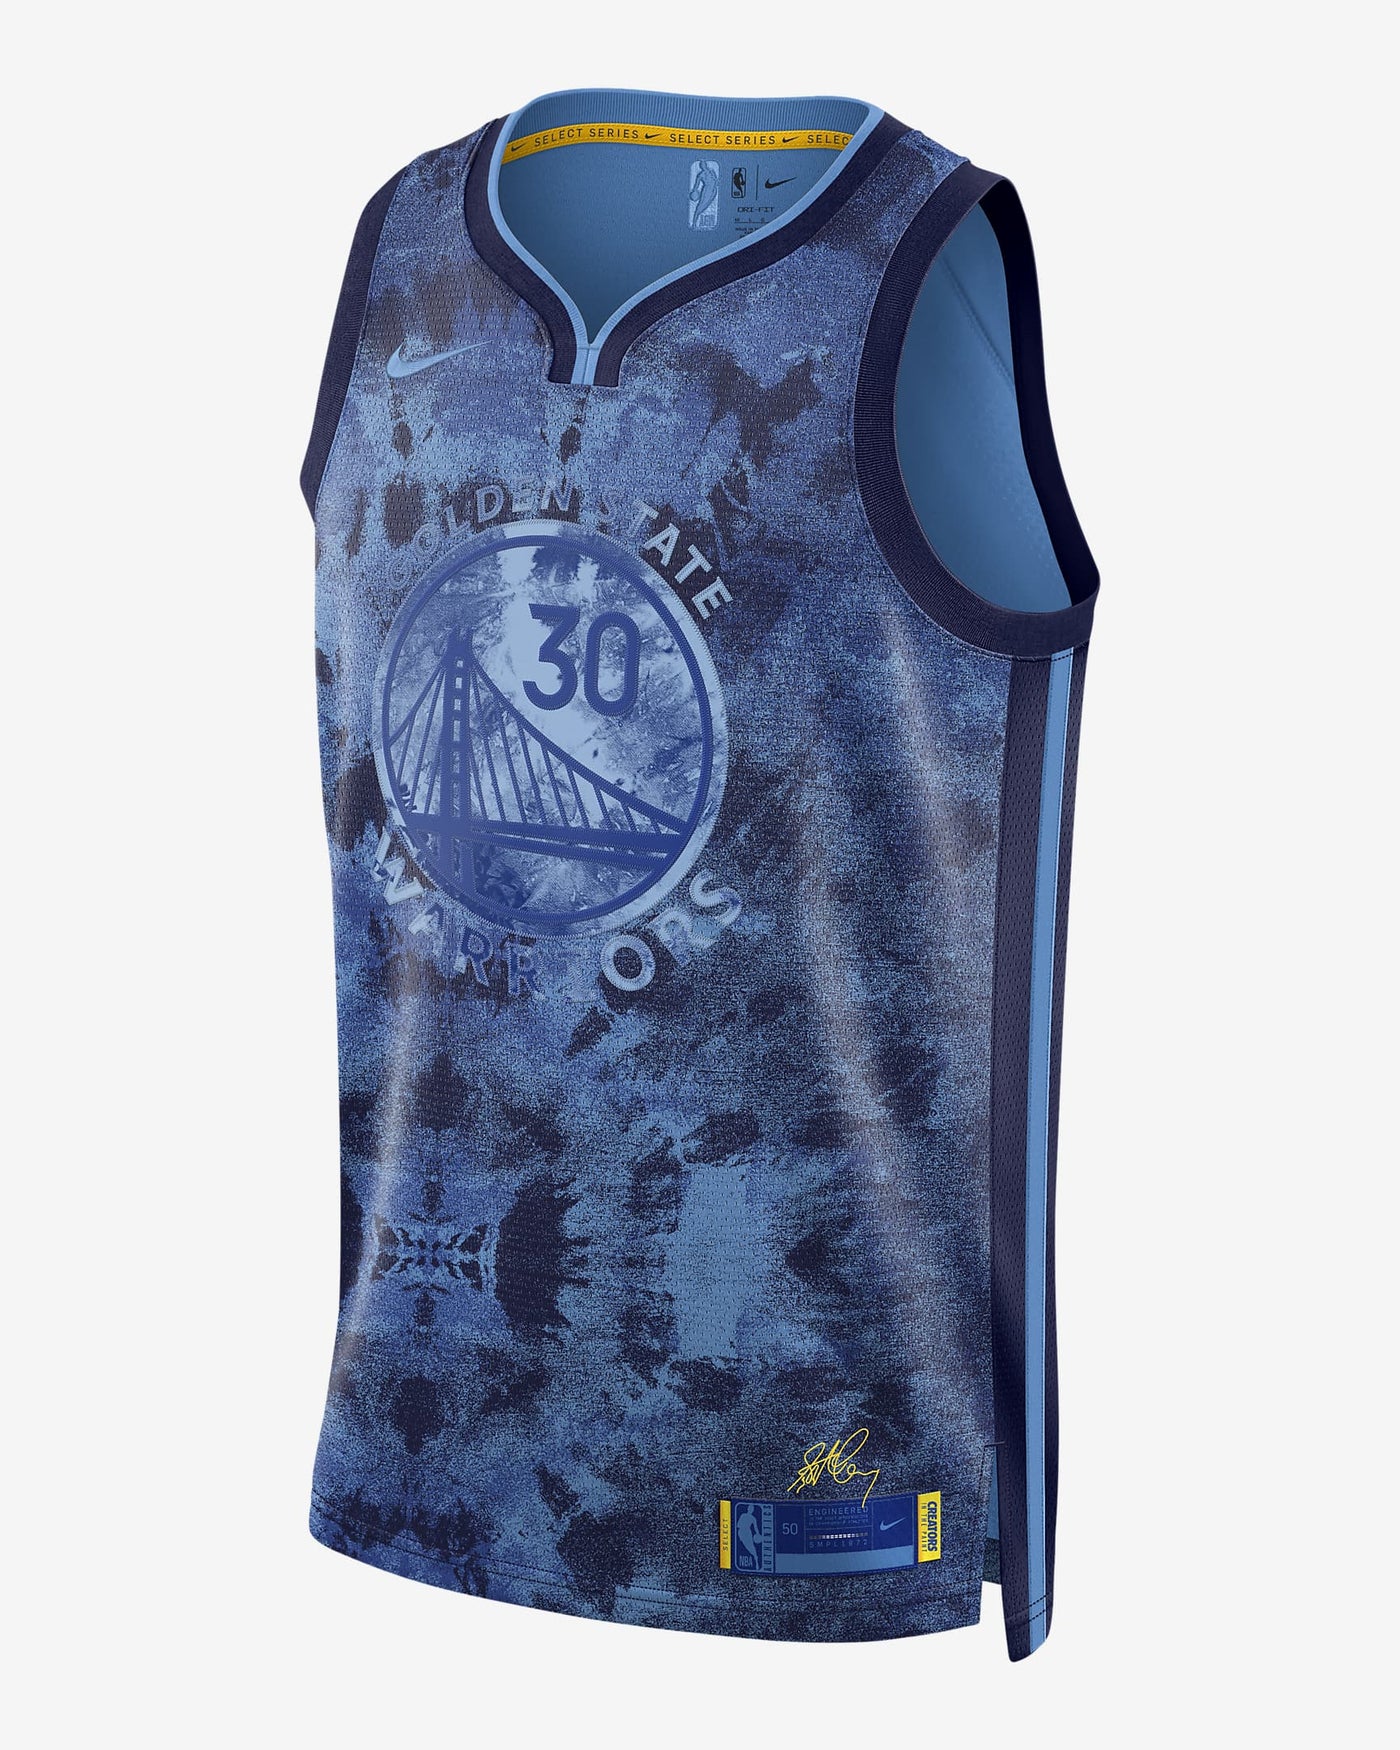 Golden State Warriors NBA City Edition jersey, get yours now